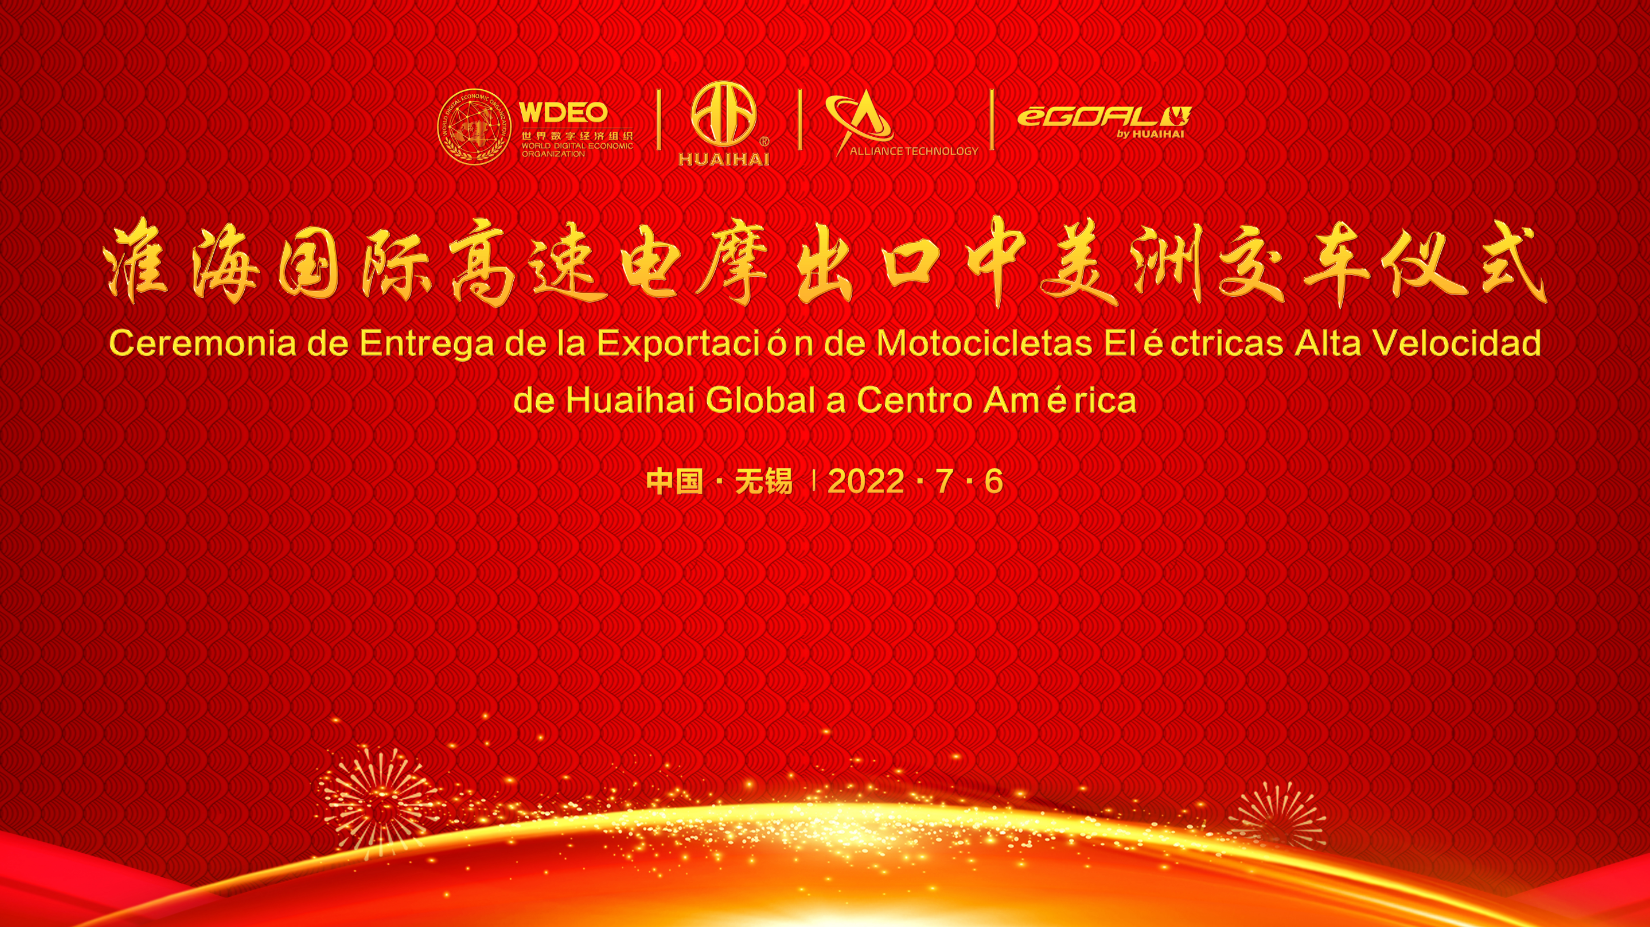 The handover ceremony of Huaihai Global’s high-speed electric motorcycle export to Central America was successfully held